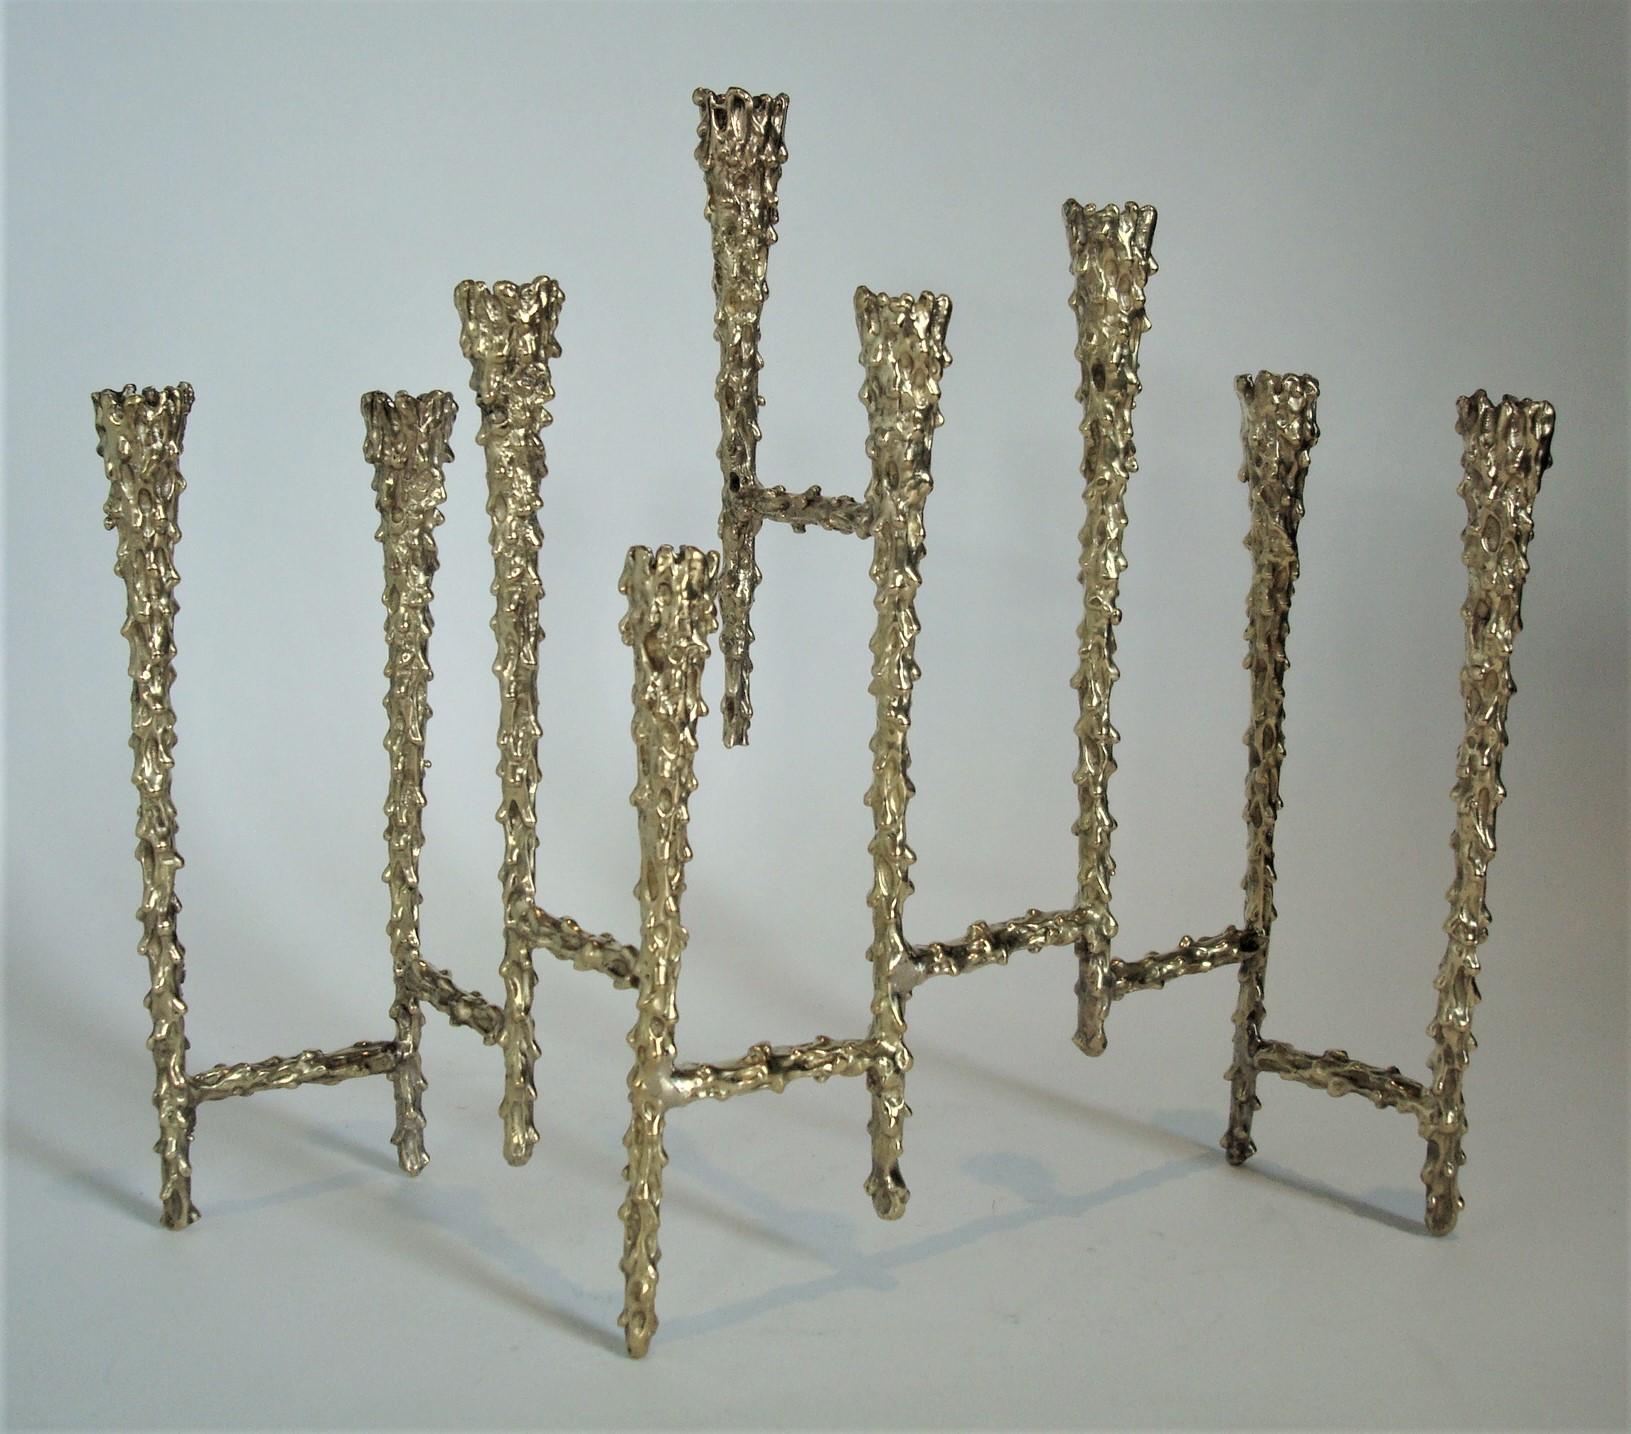 Handcrafted 1960s Brutalist candleholder in excellent condition out of solid brass.
Truly exquisite menorah in the Brutalist style. This piece is made of chased brass with intricate surface decoration. A spectacular, sculptural piece in excellent